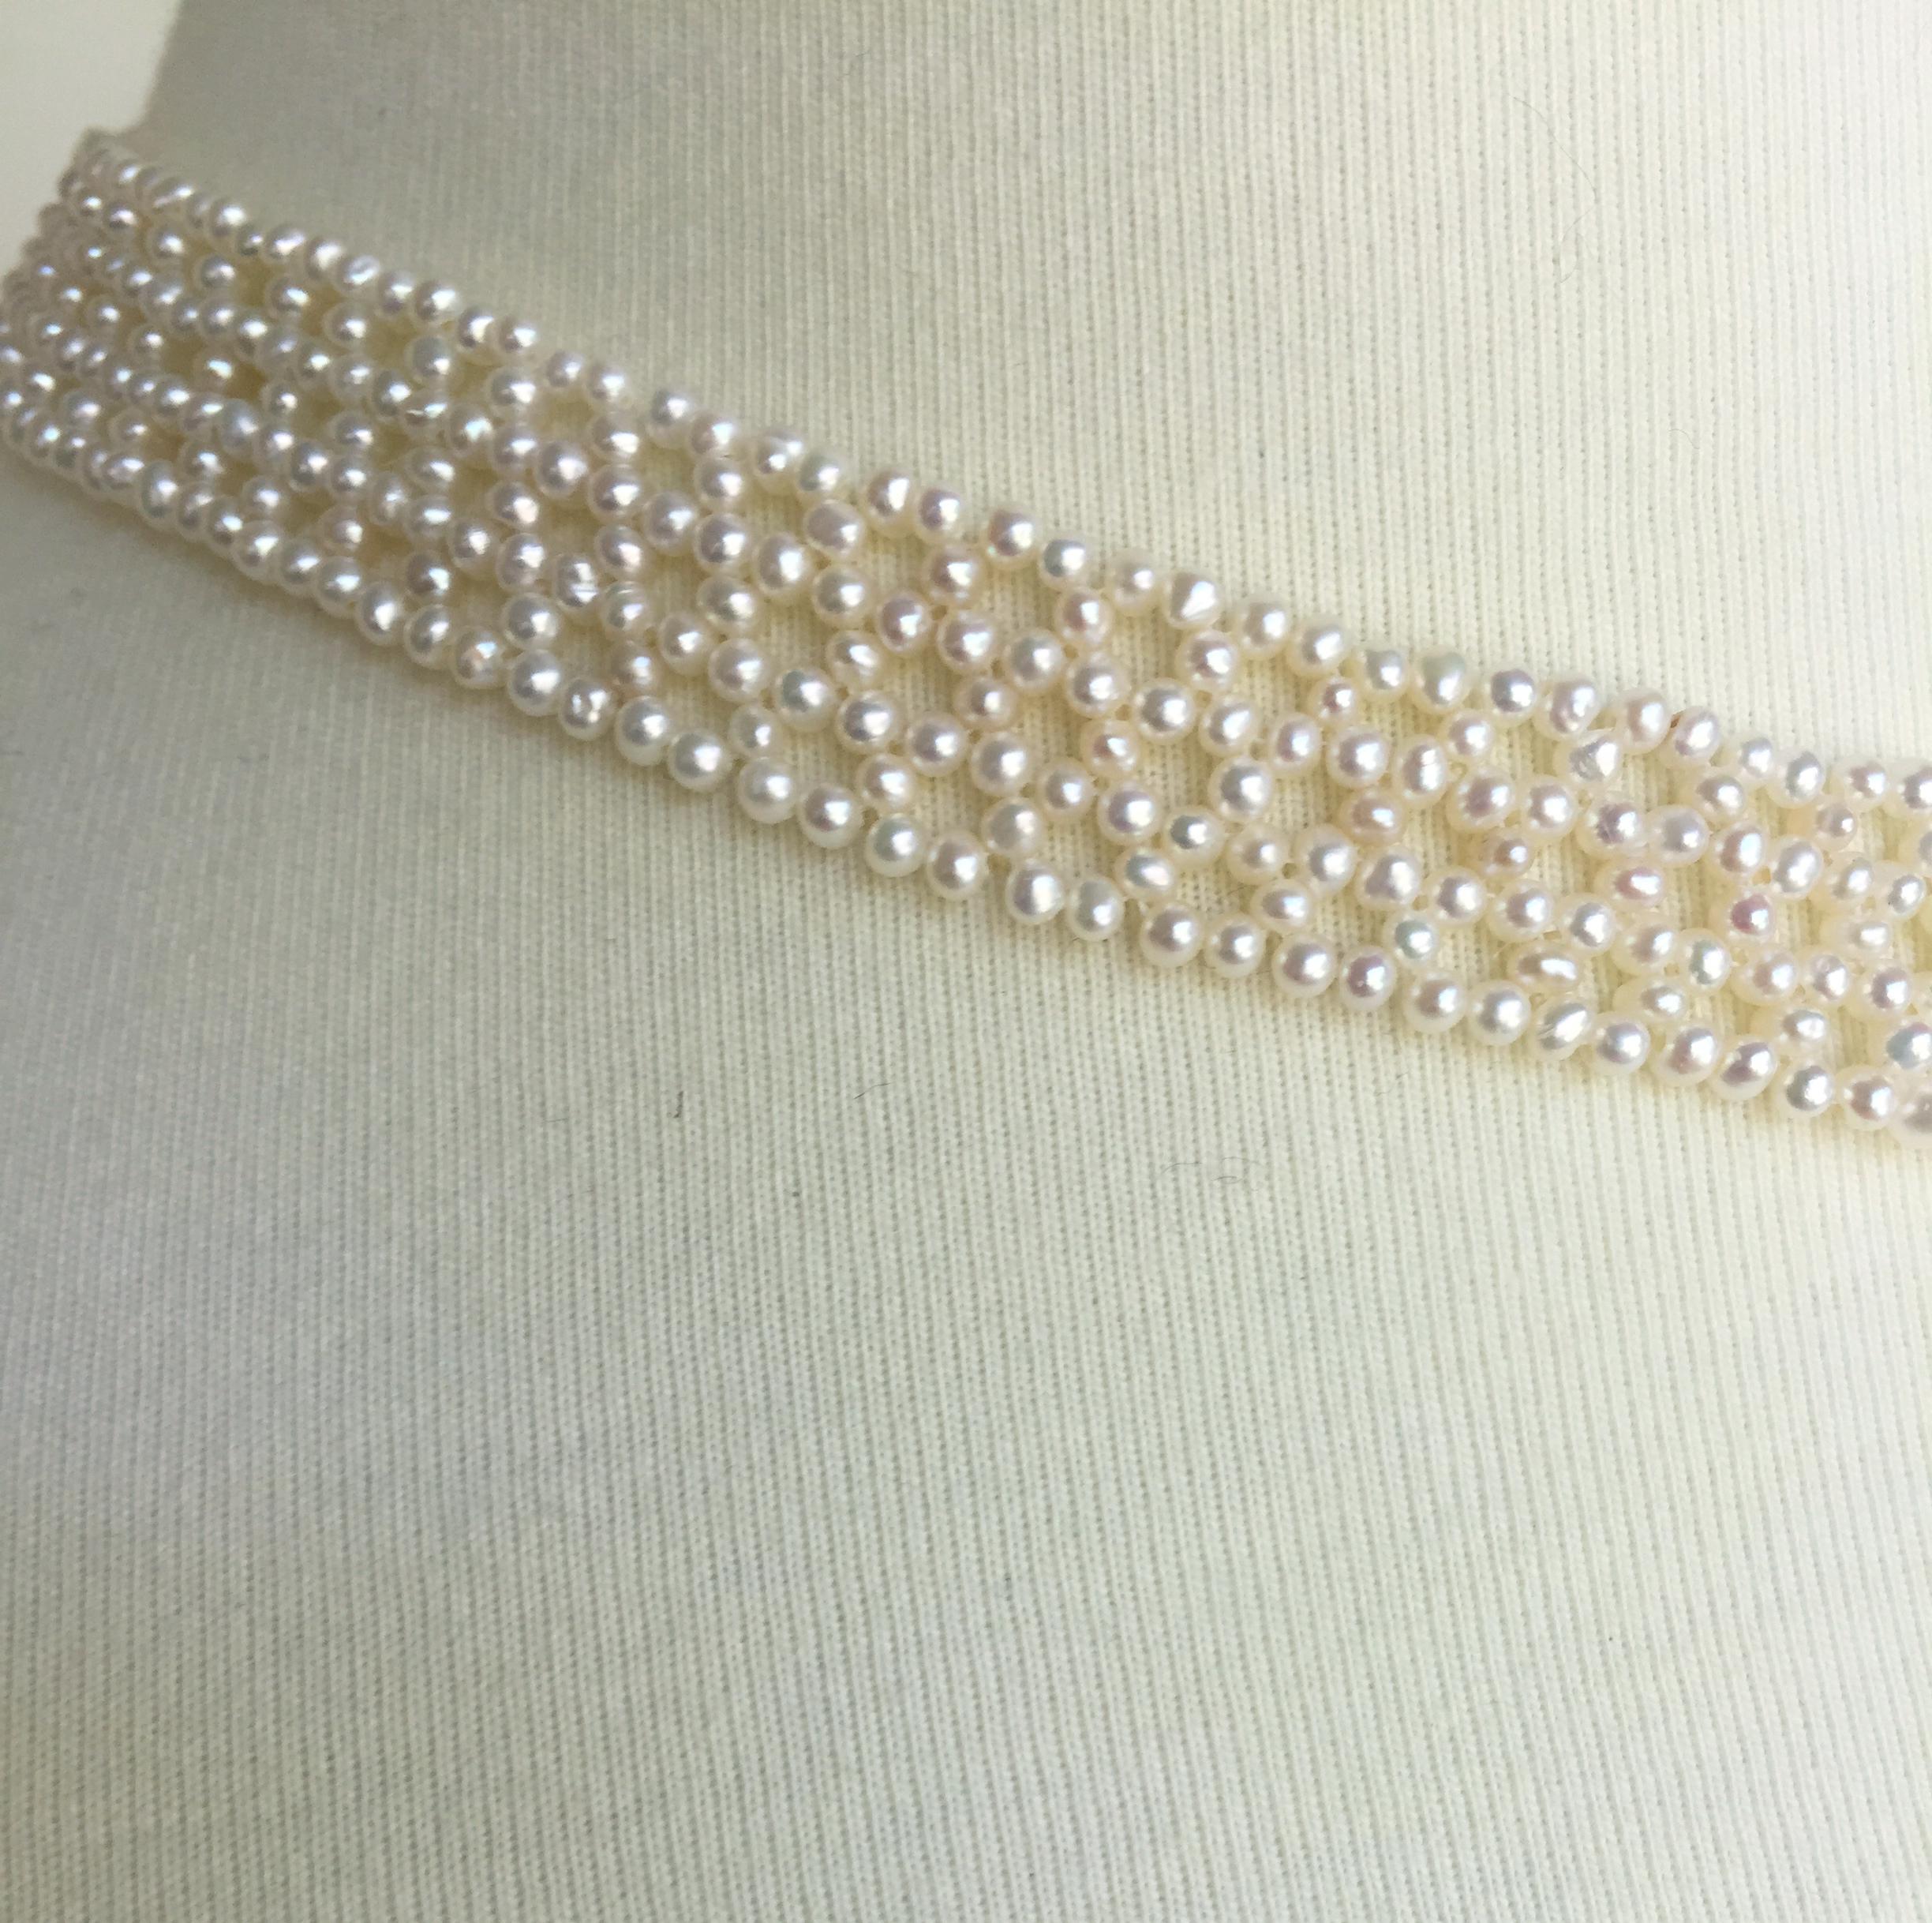 Women's Marina J Woven 'V' Shaped Pearl Necklace with Vintage Brooch